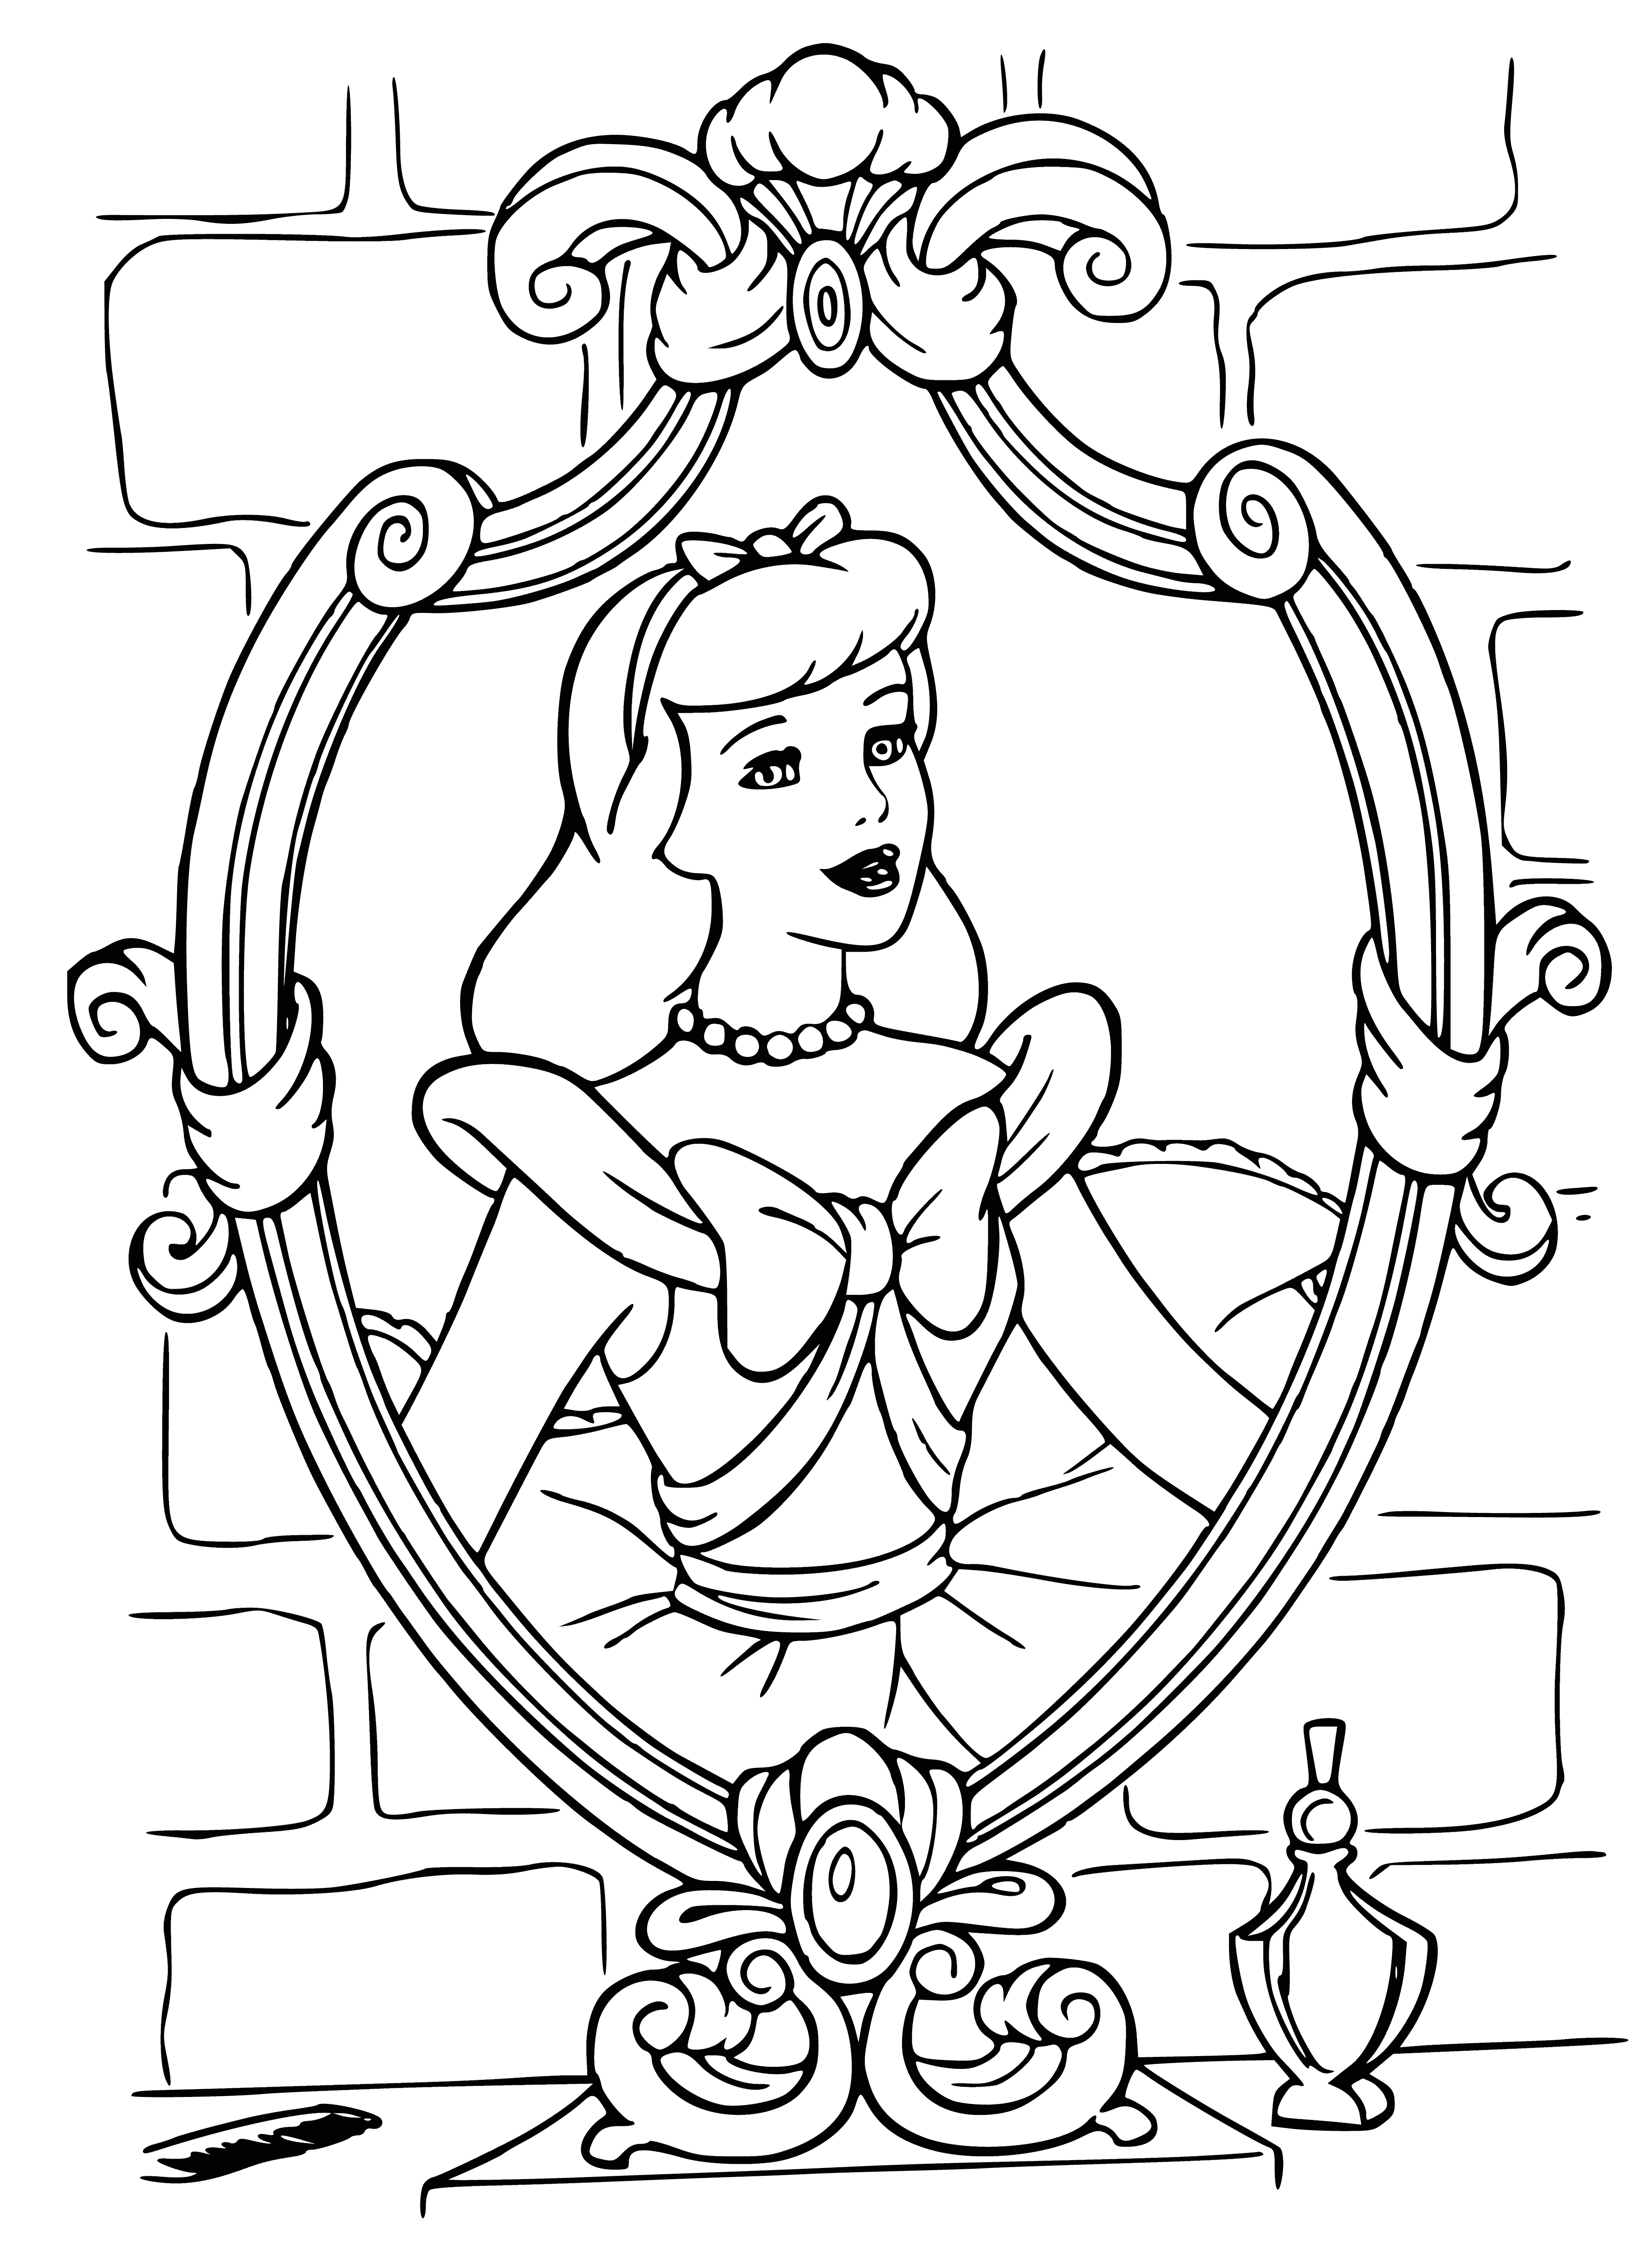 coloring page: A girl in a dusty dress stands sadly, hair messed up, holding a broom in her hand and looking in a mirror.